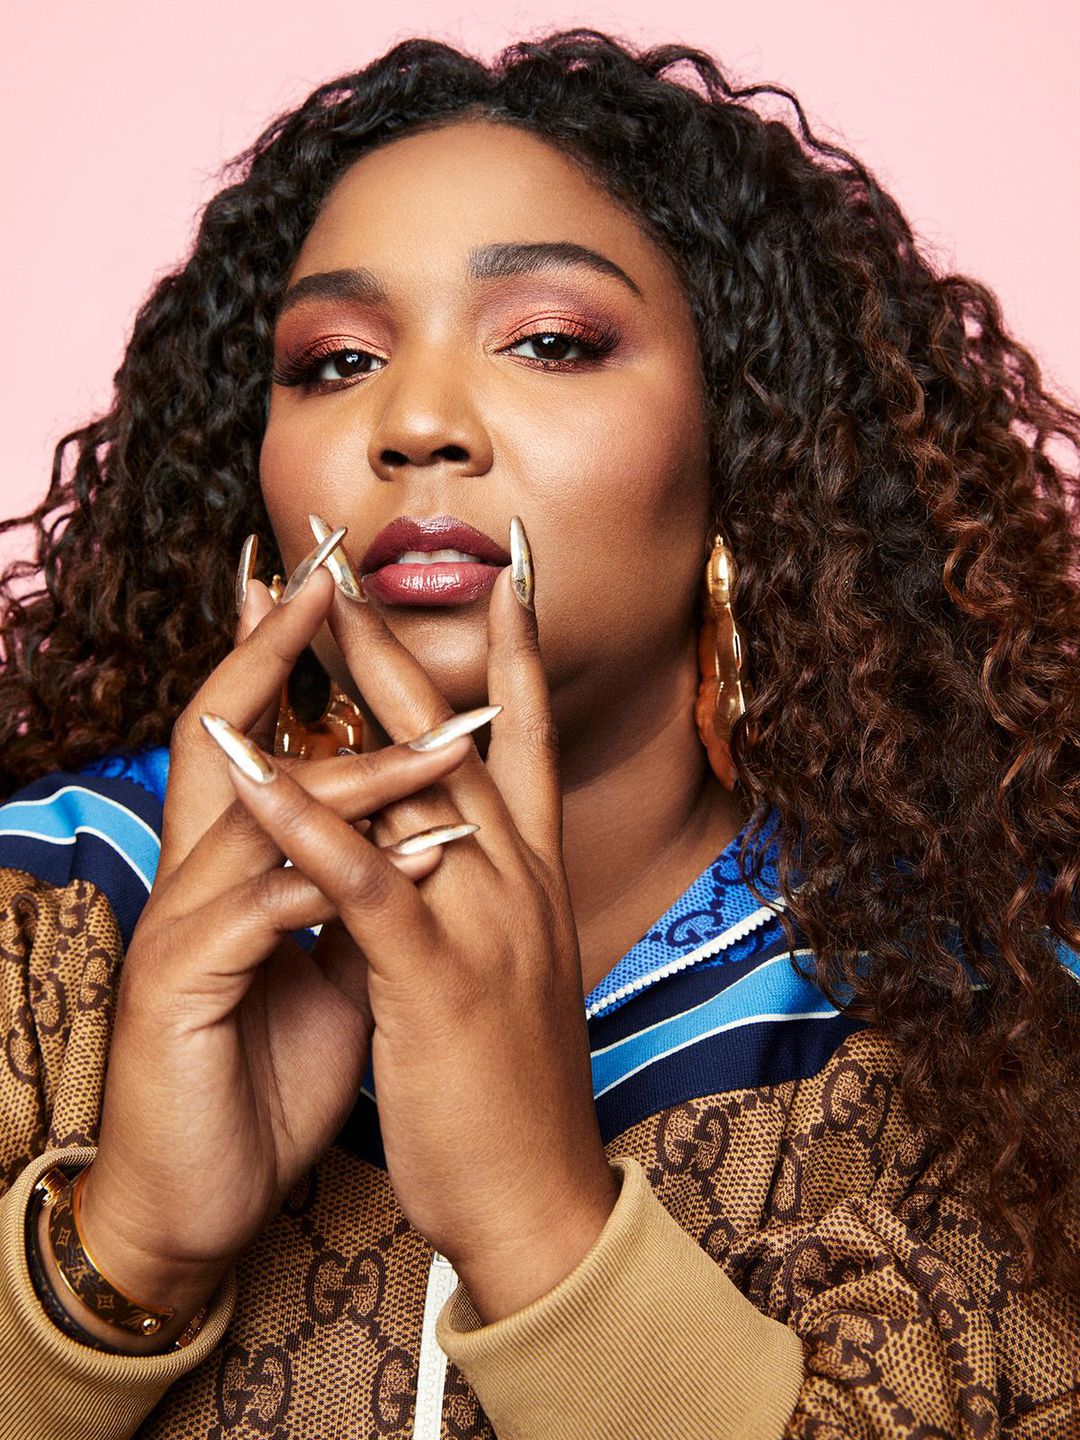 Lizzo young photos